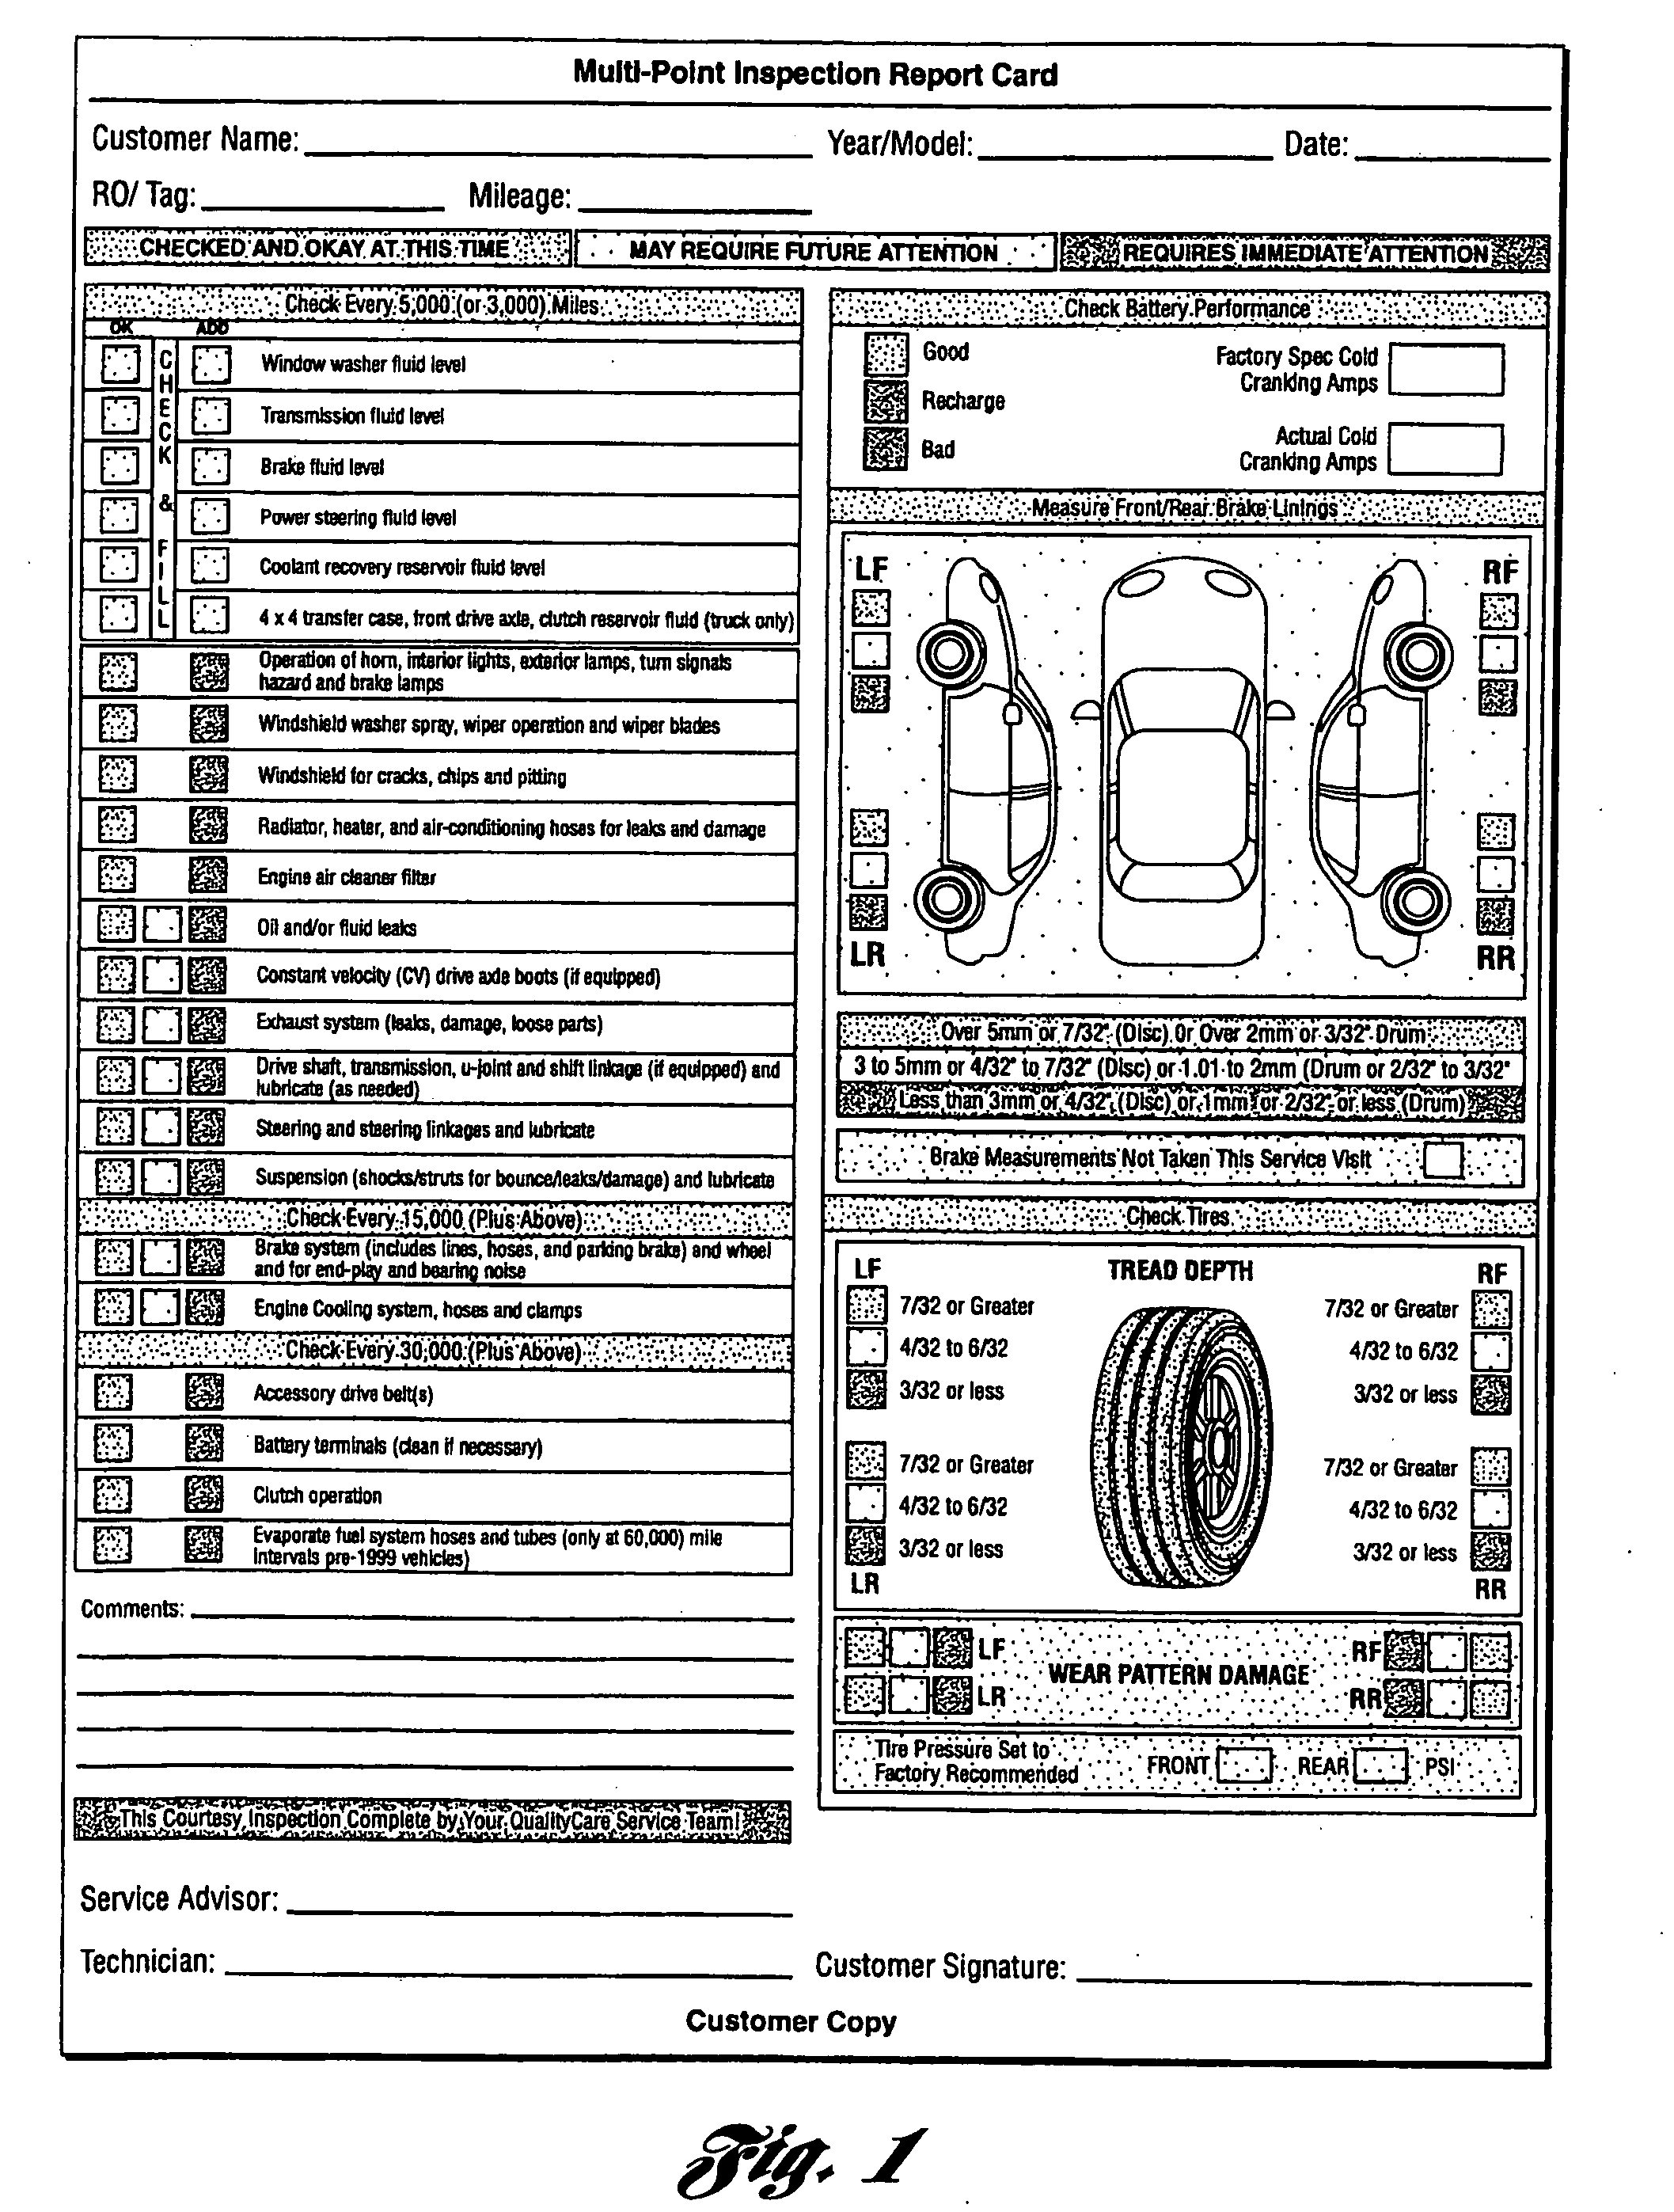 Multi Point Inspection Report Card As Recommendedford Intended For Truck Condition Report Template